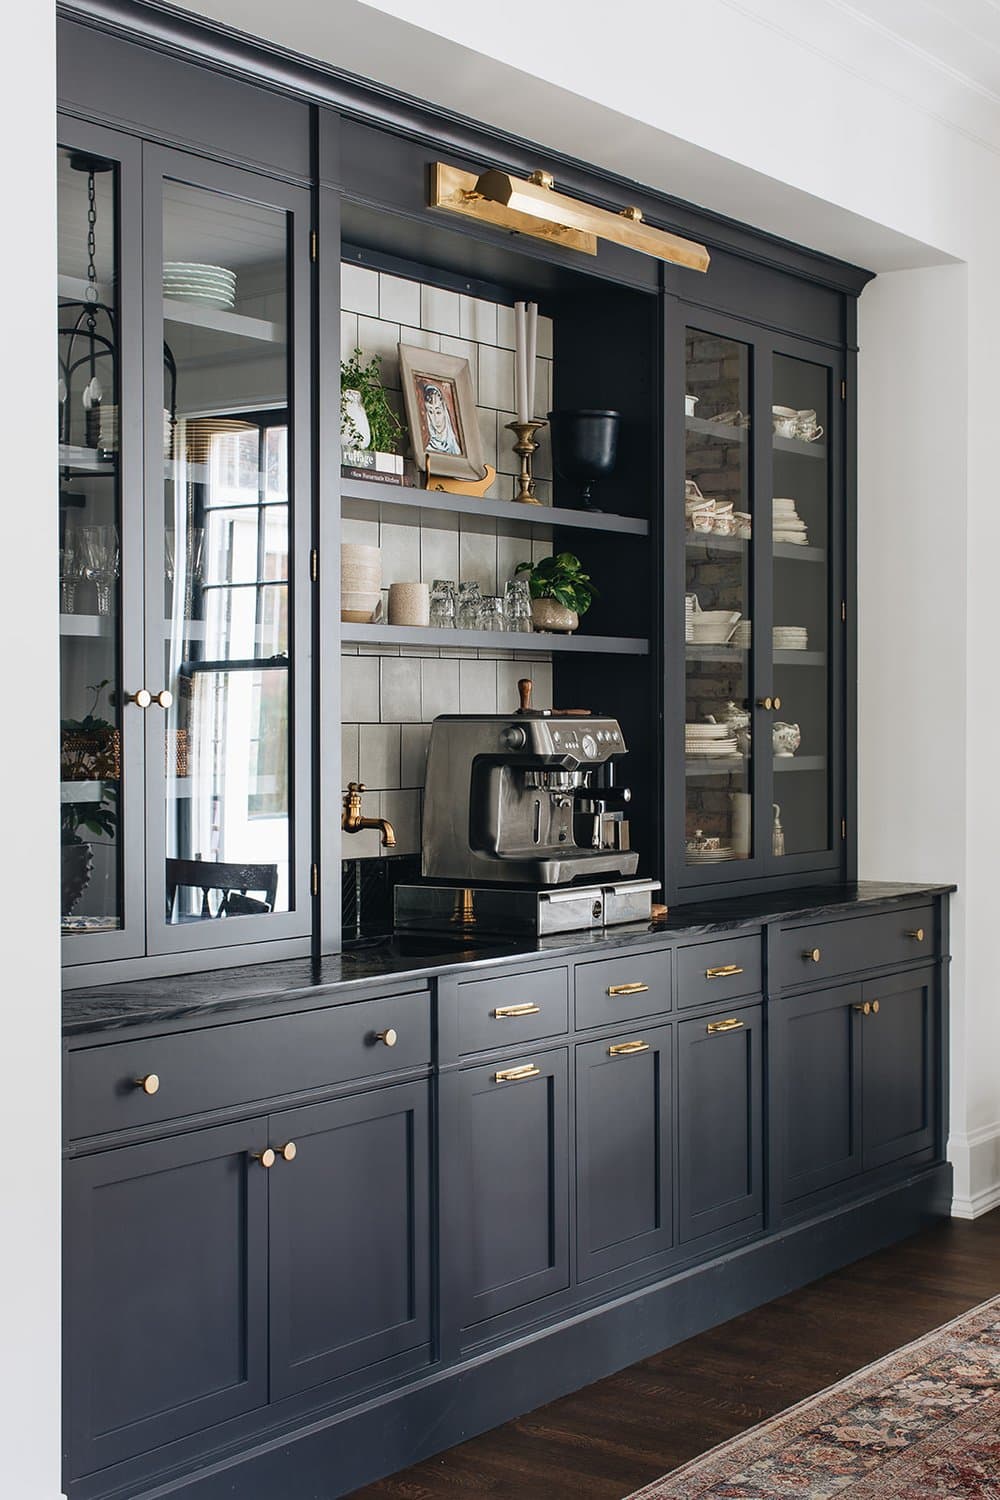 Designing a small coffee bar within your kitchen can add both functionality and charm to your space. Jean Stoffer Design | Stoffer Photography Interiors